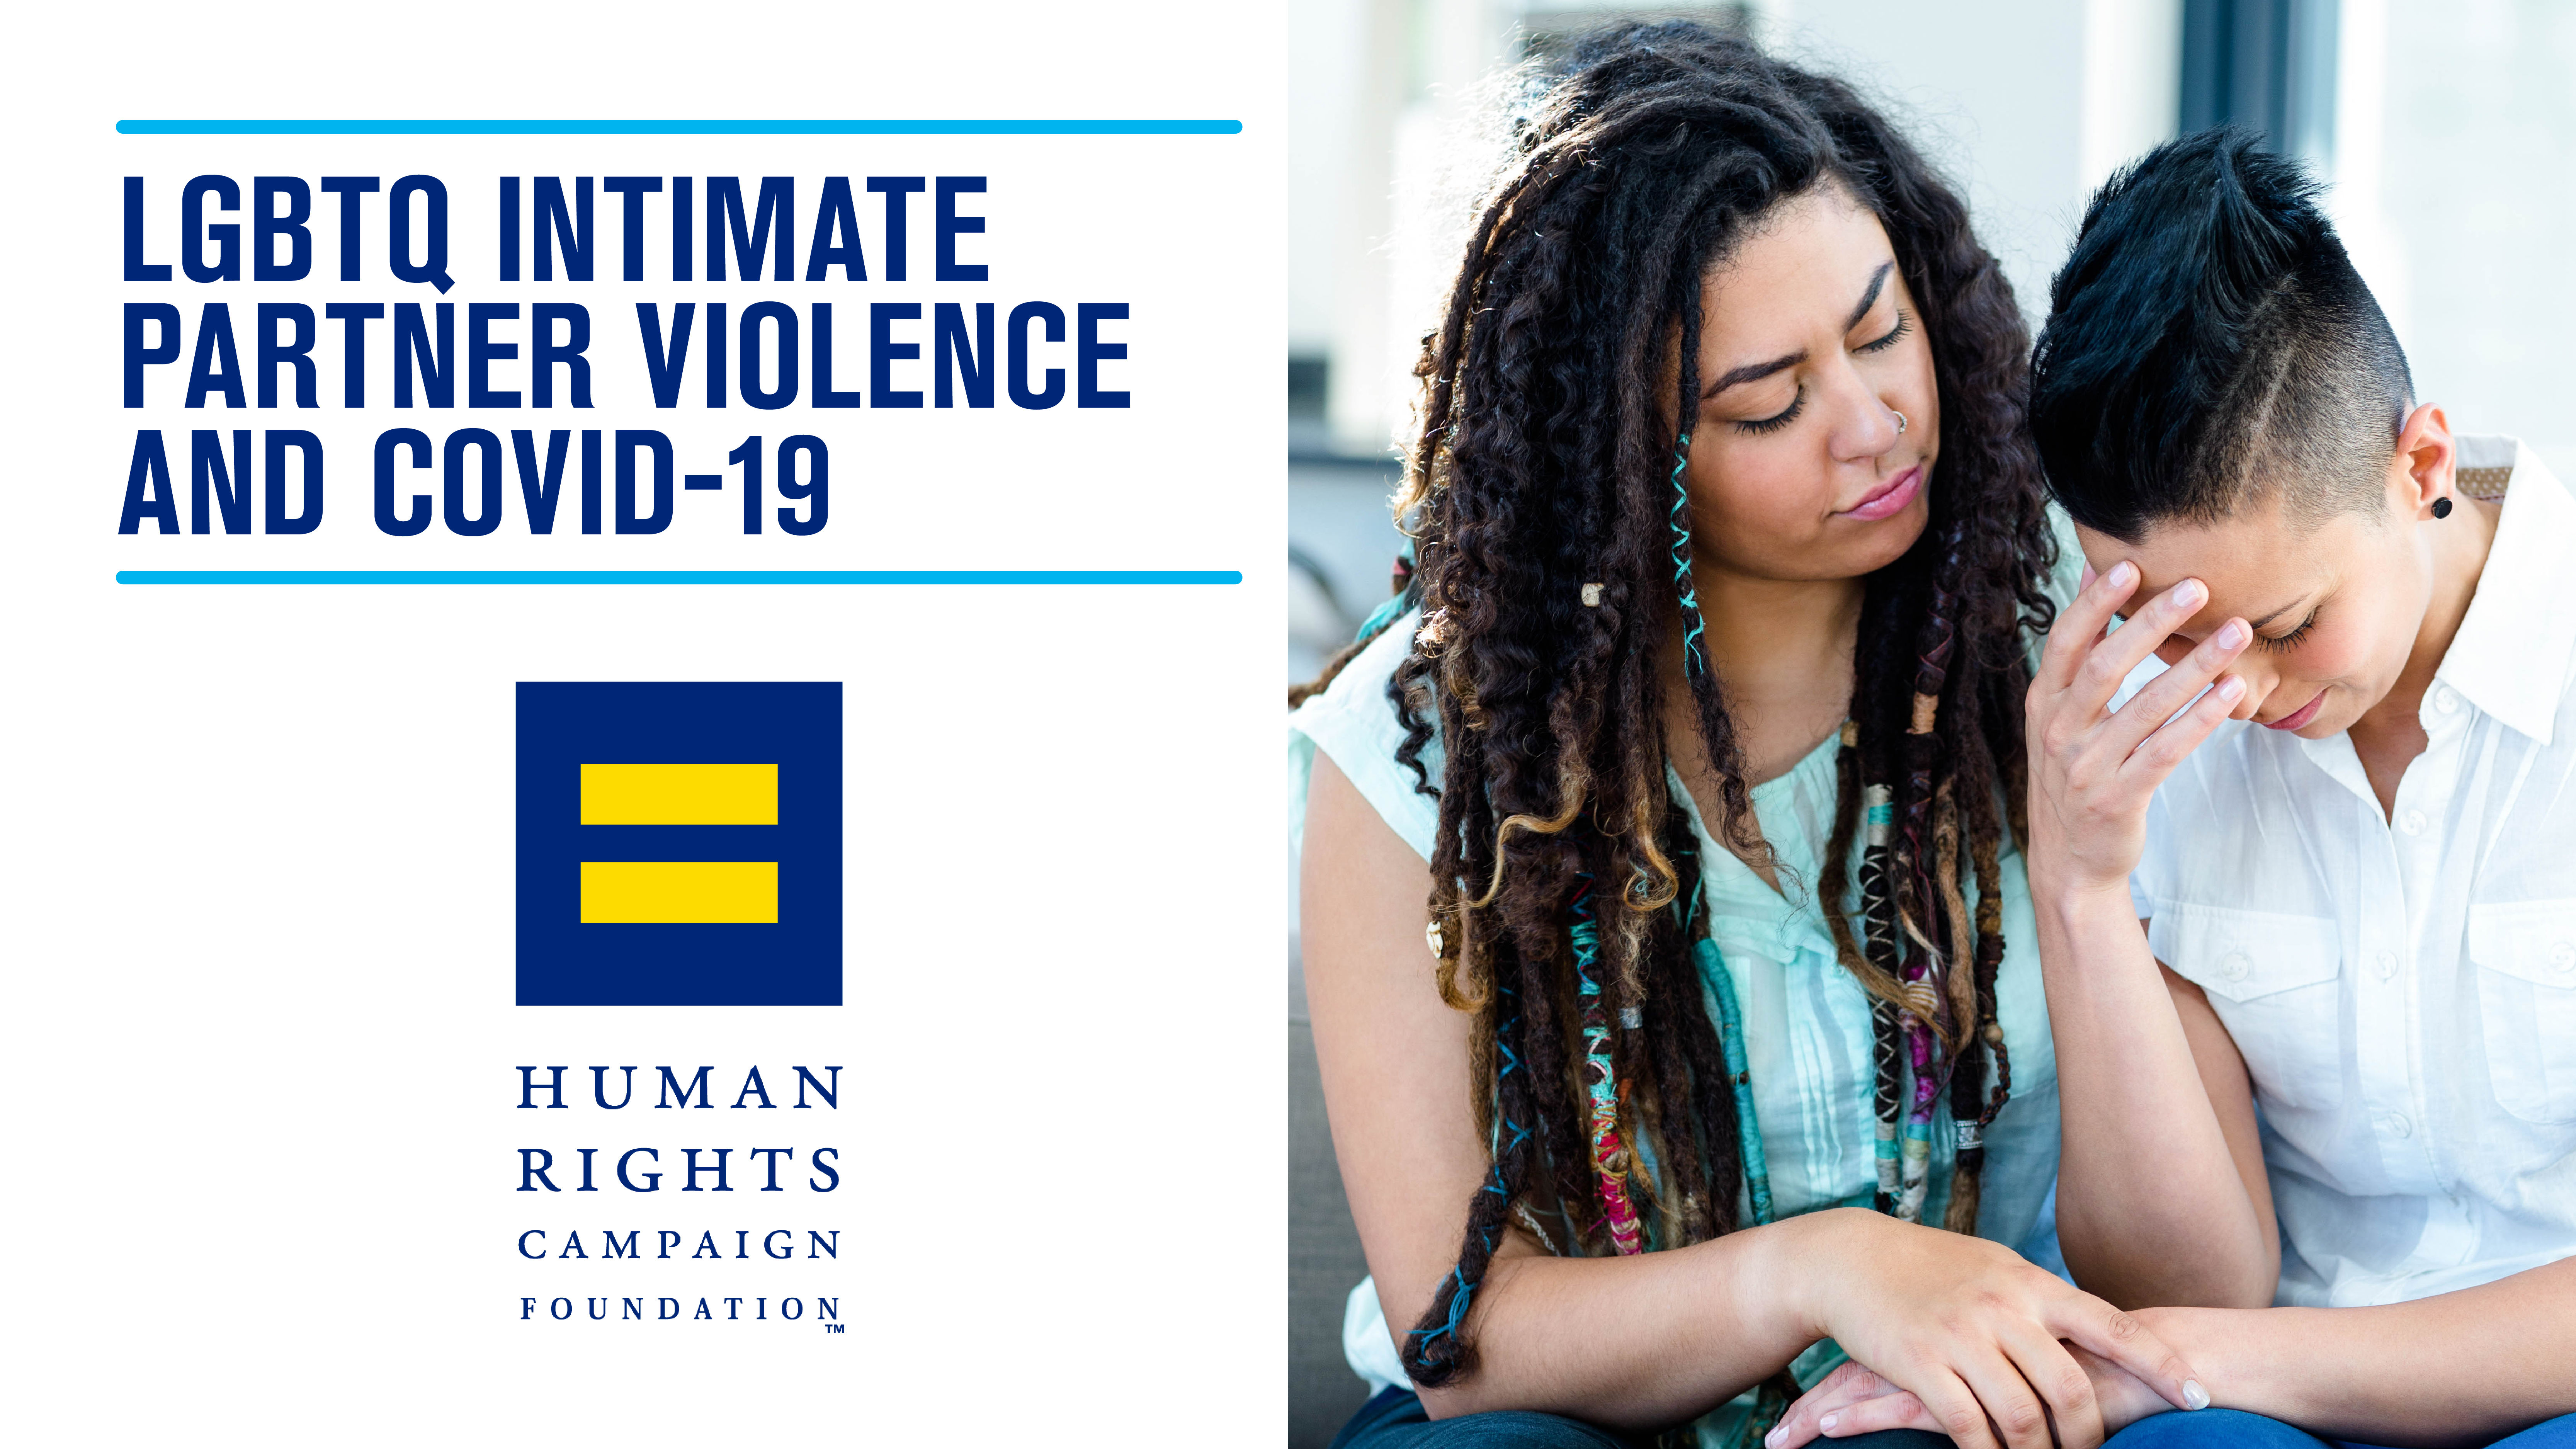 Hrc Report Shows Increased Likelihood Of Interpersonal Violence Human Rights Campaign